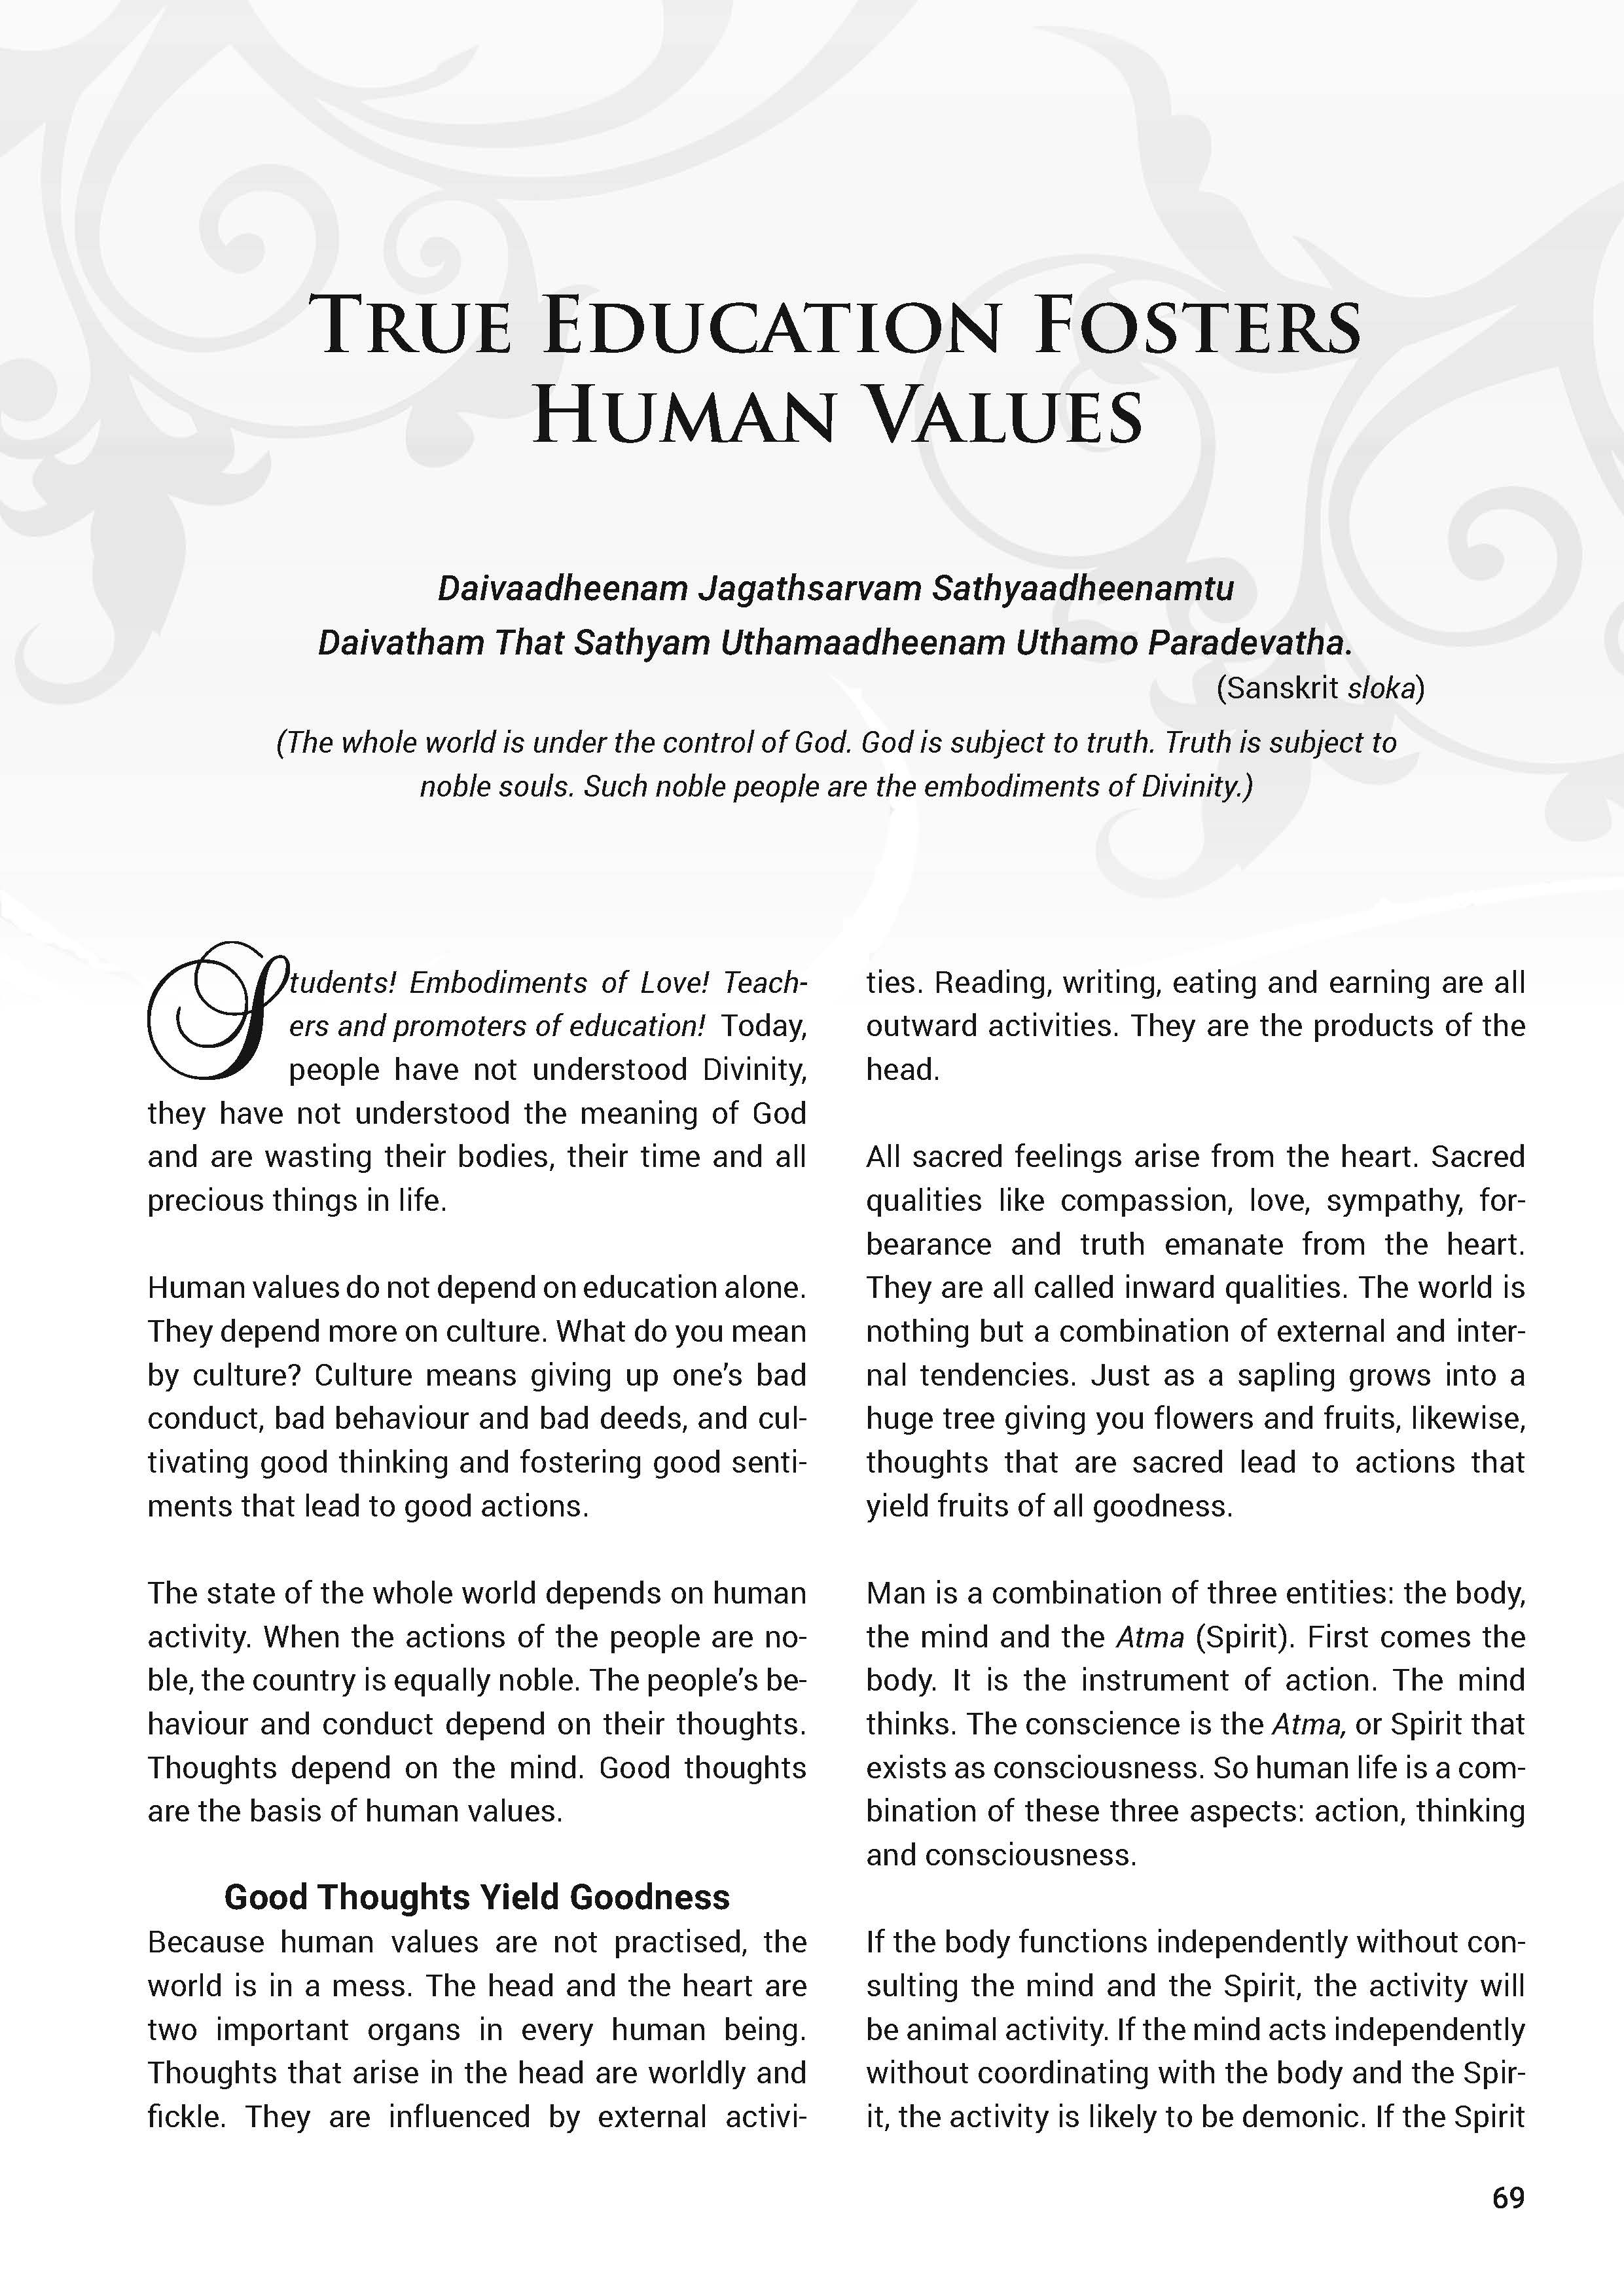 importance of values in human life